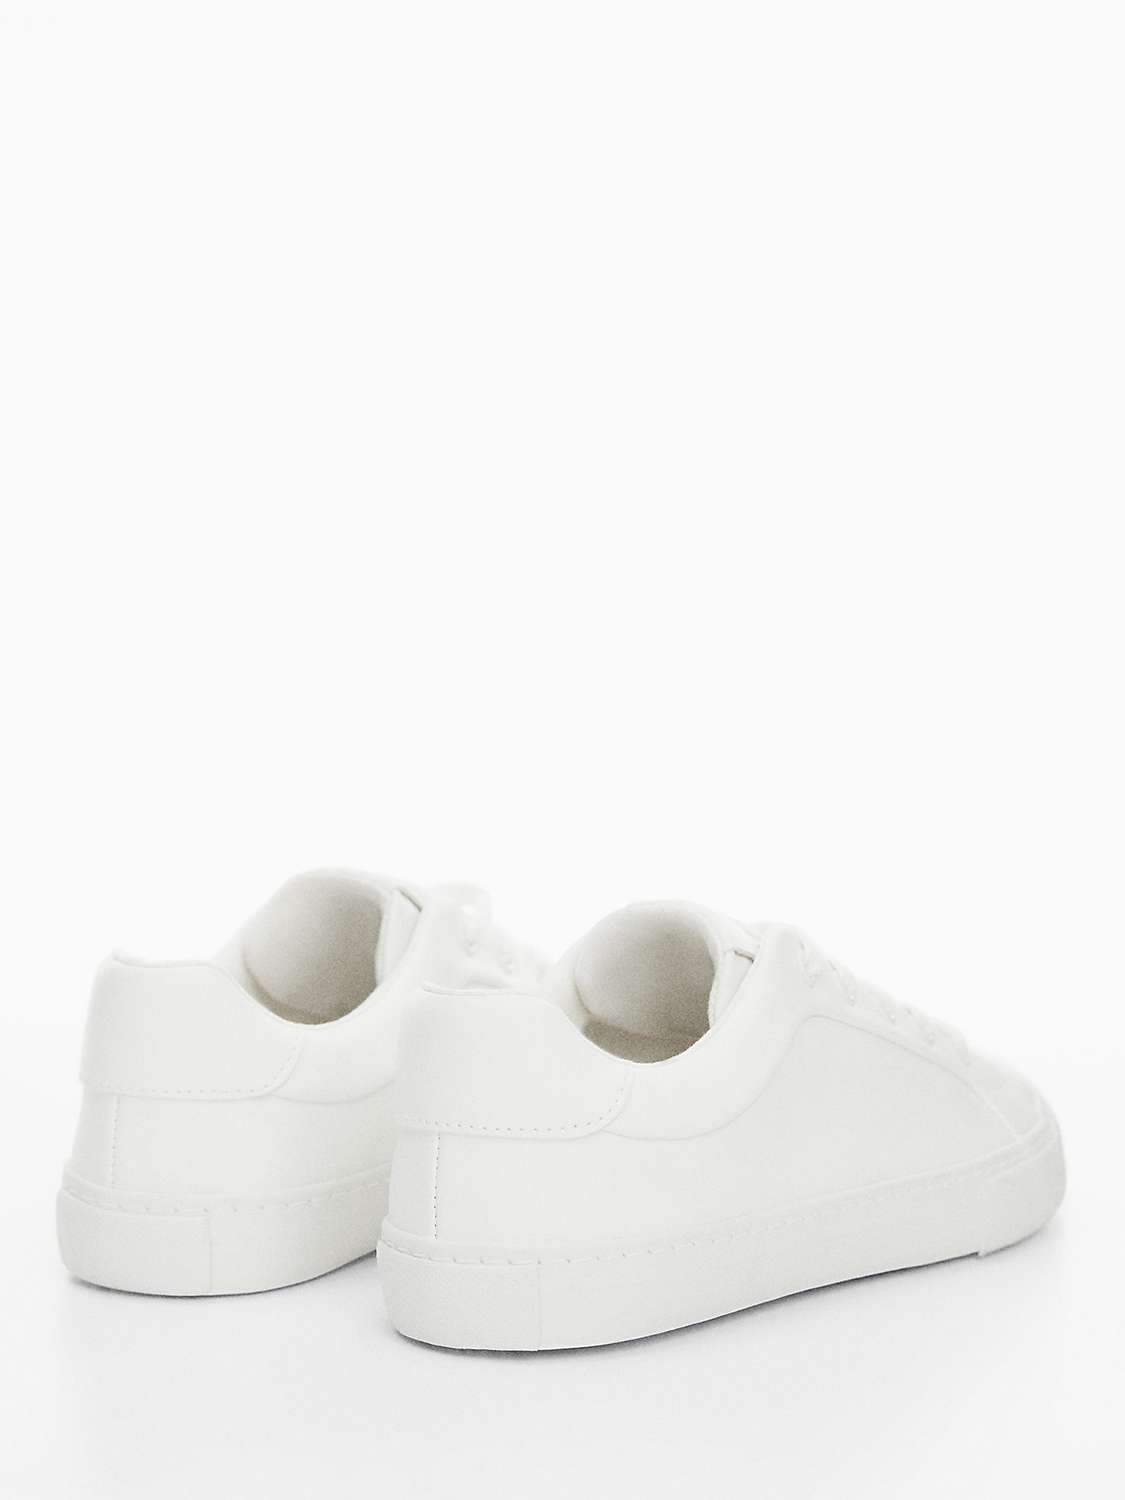 Buy Mango Kids' Adam Lace Up Trainers, White Online at johnlewis.com